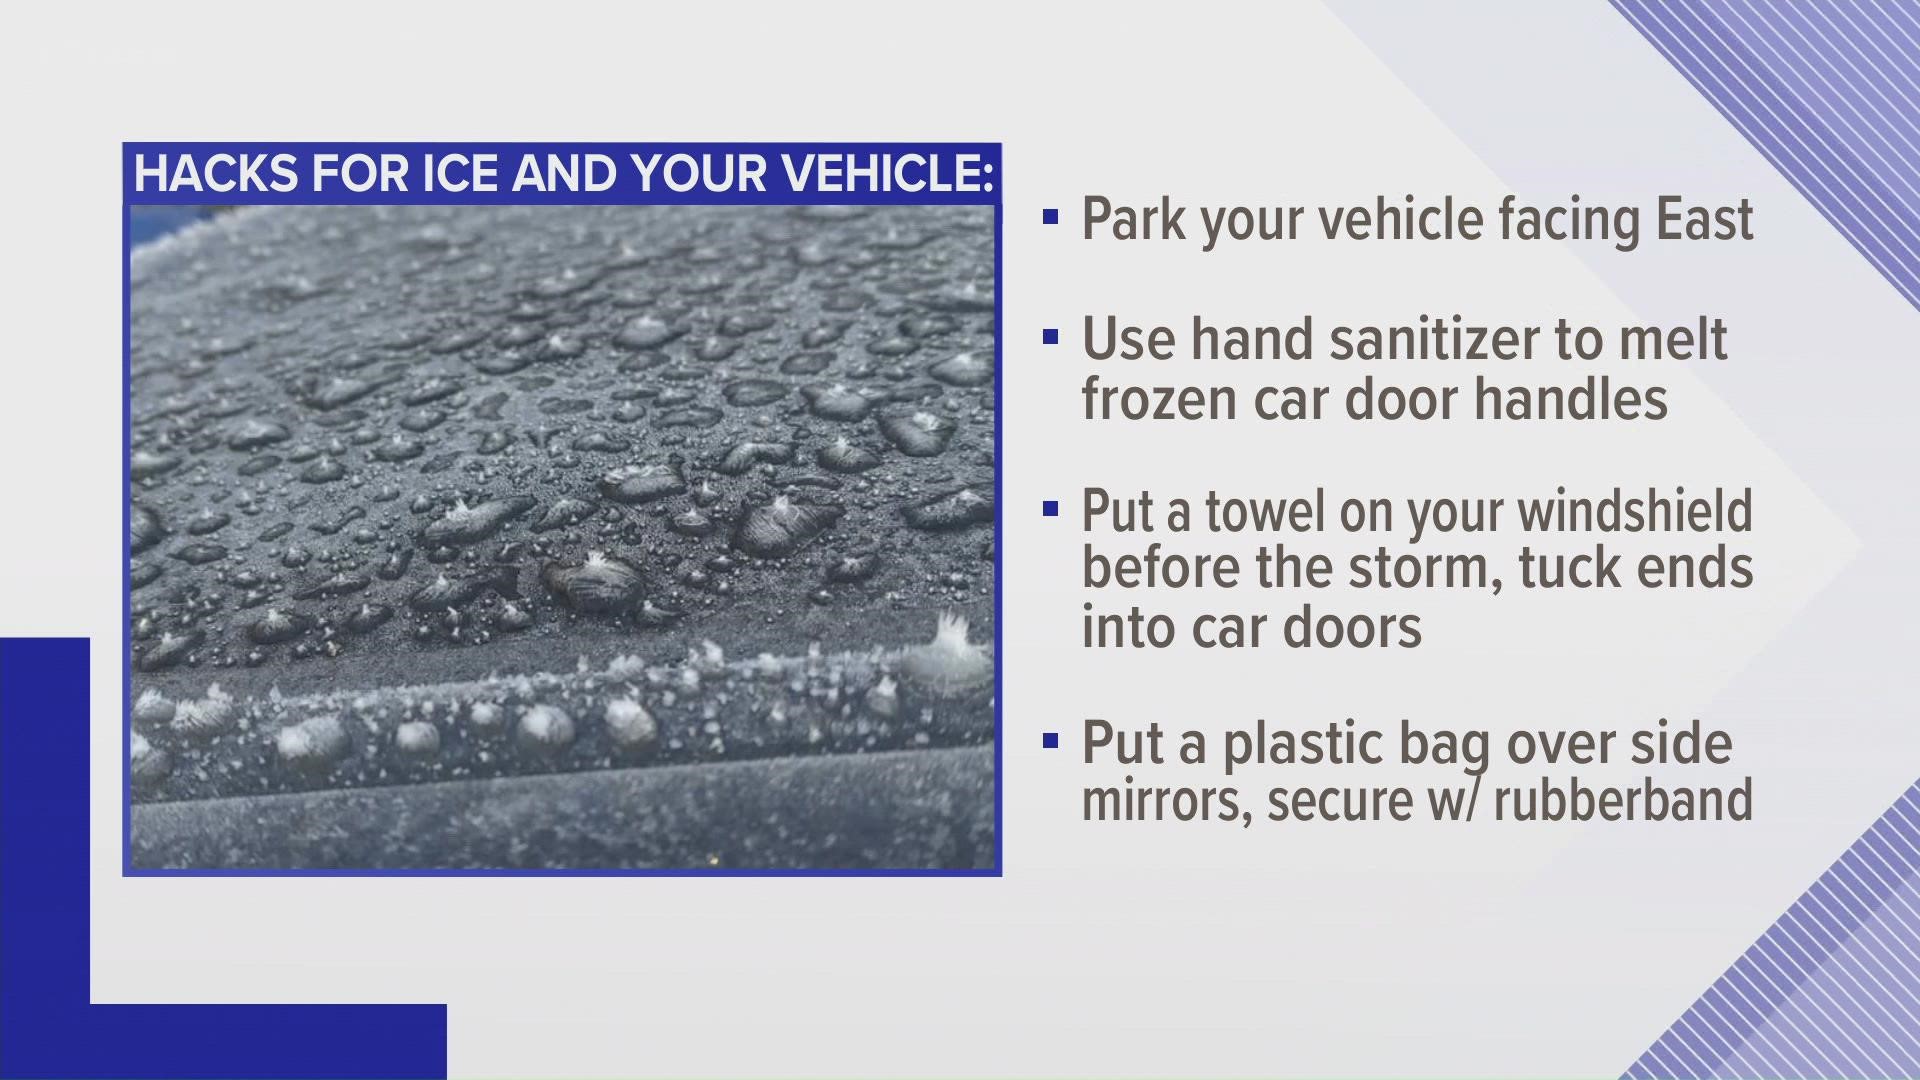 Here are a few tips to help you -- and your vehicle -- through winter weather.